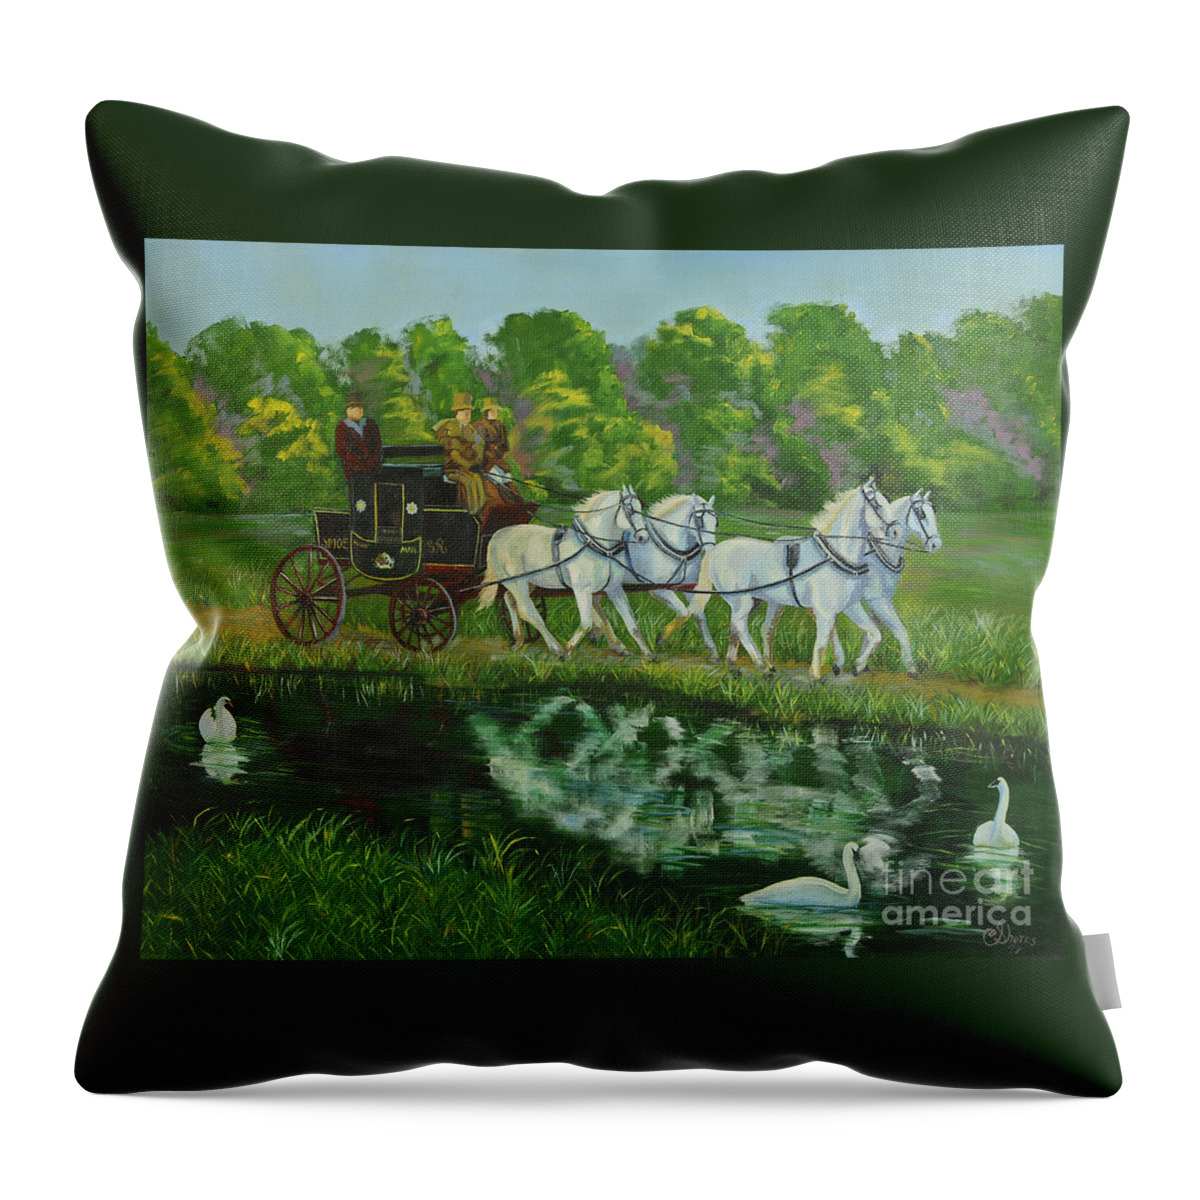 Mail Coach Throw Pillow featuring the painting Coach And Four In Hand by Charlotte Blanchard